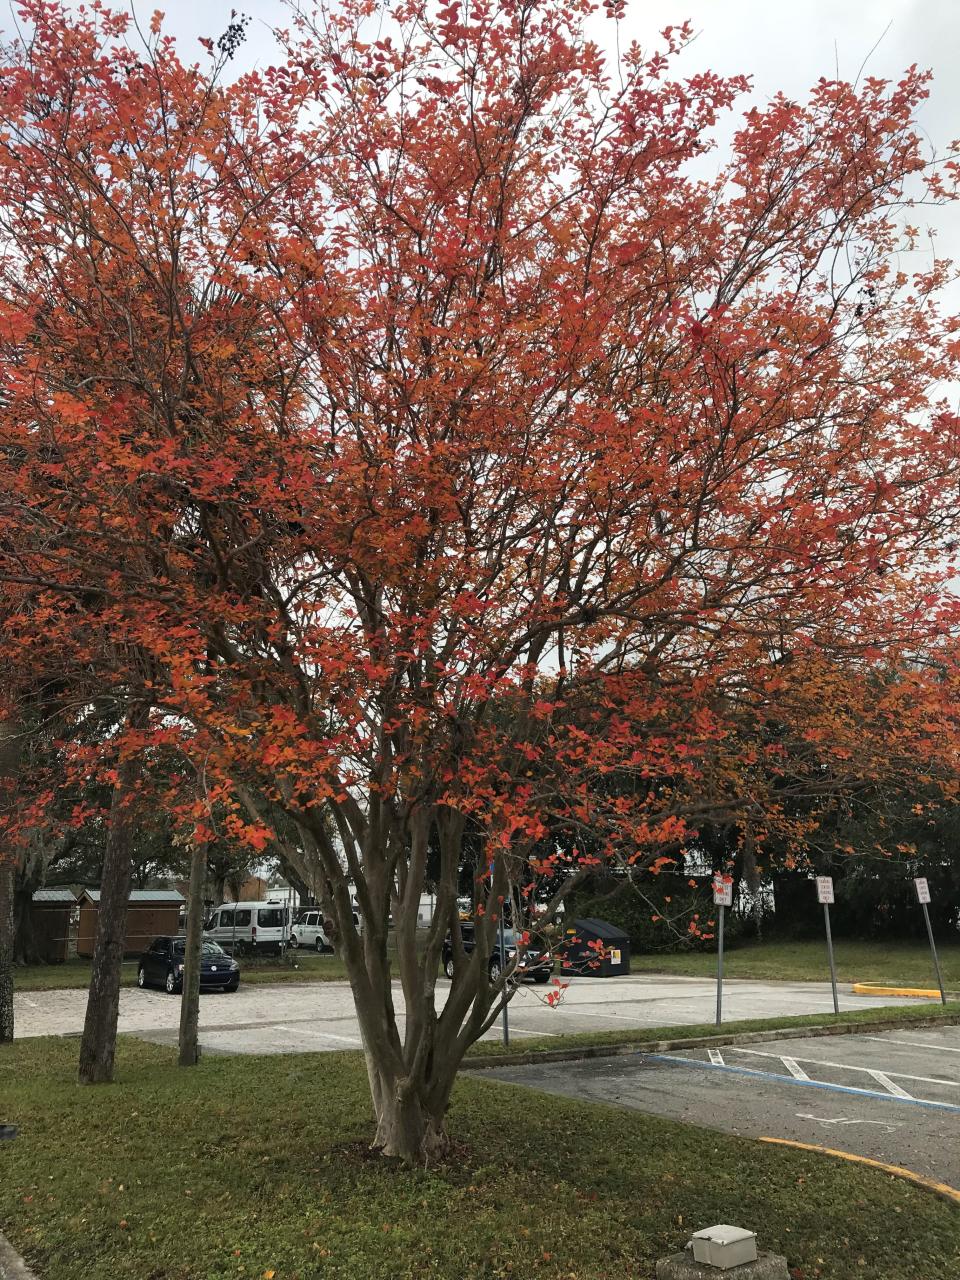 Not only does the crape myrtle provide summer flowers, it has nice fall colors as well.